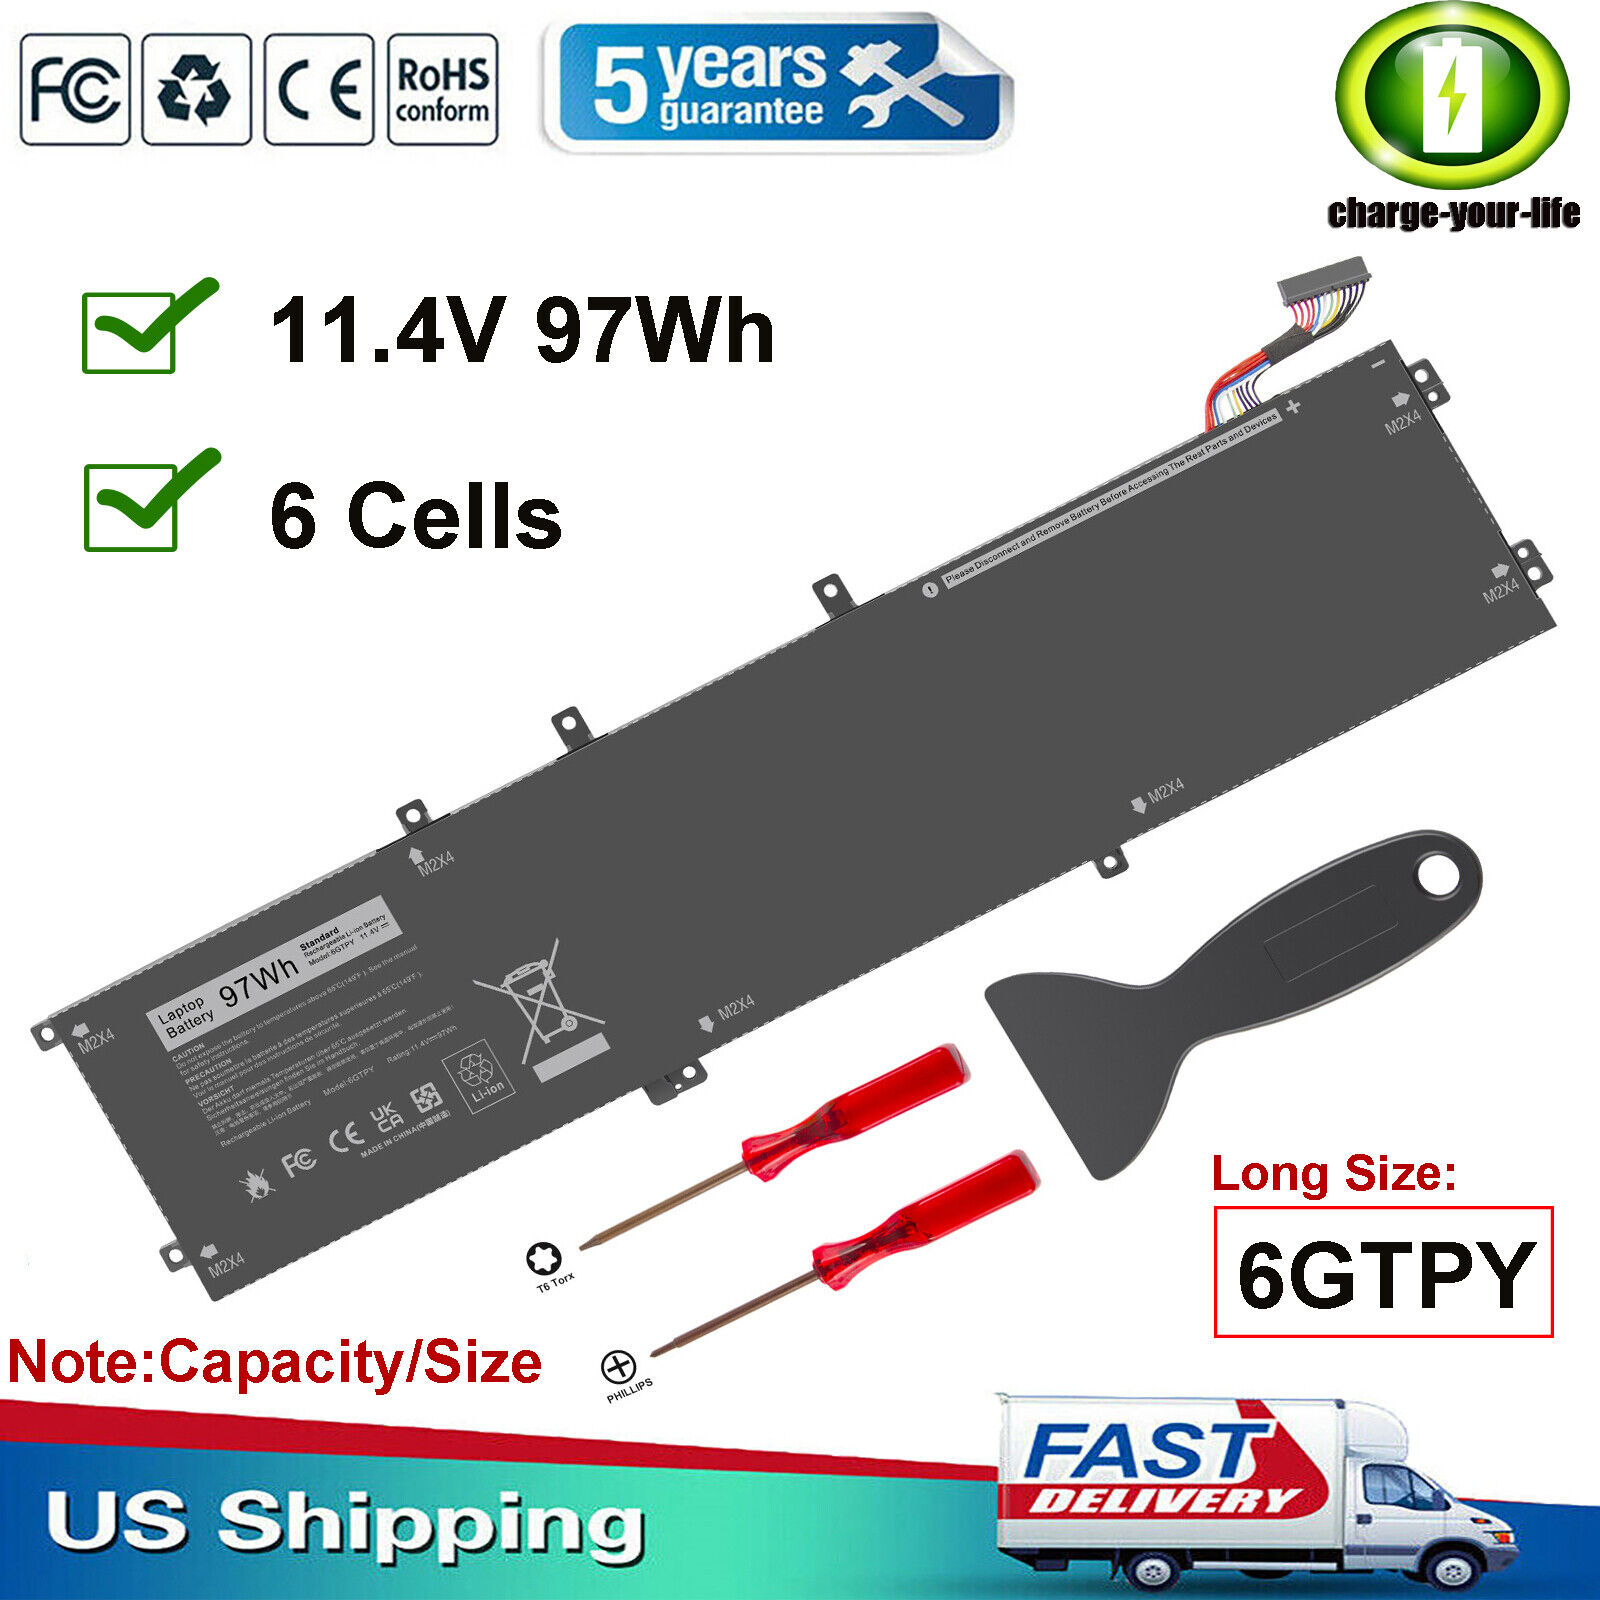 Battery 6GTPY For Dell XPS 15 9550 9560 9570 7590 Precision 5510 5520 5530 97Wh